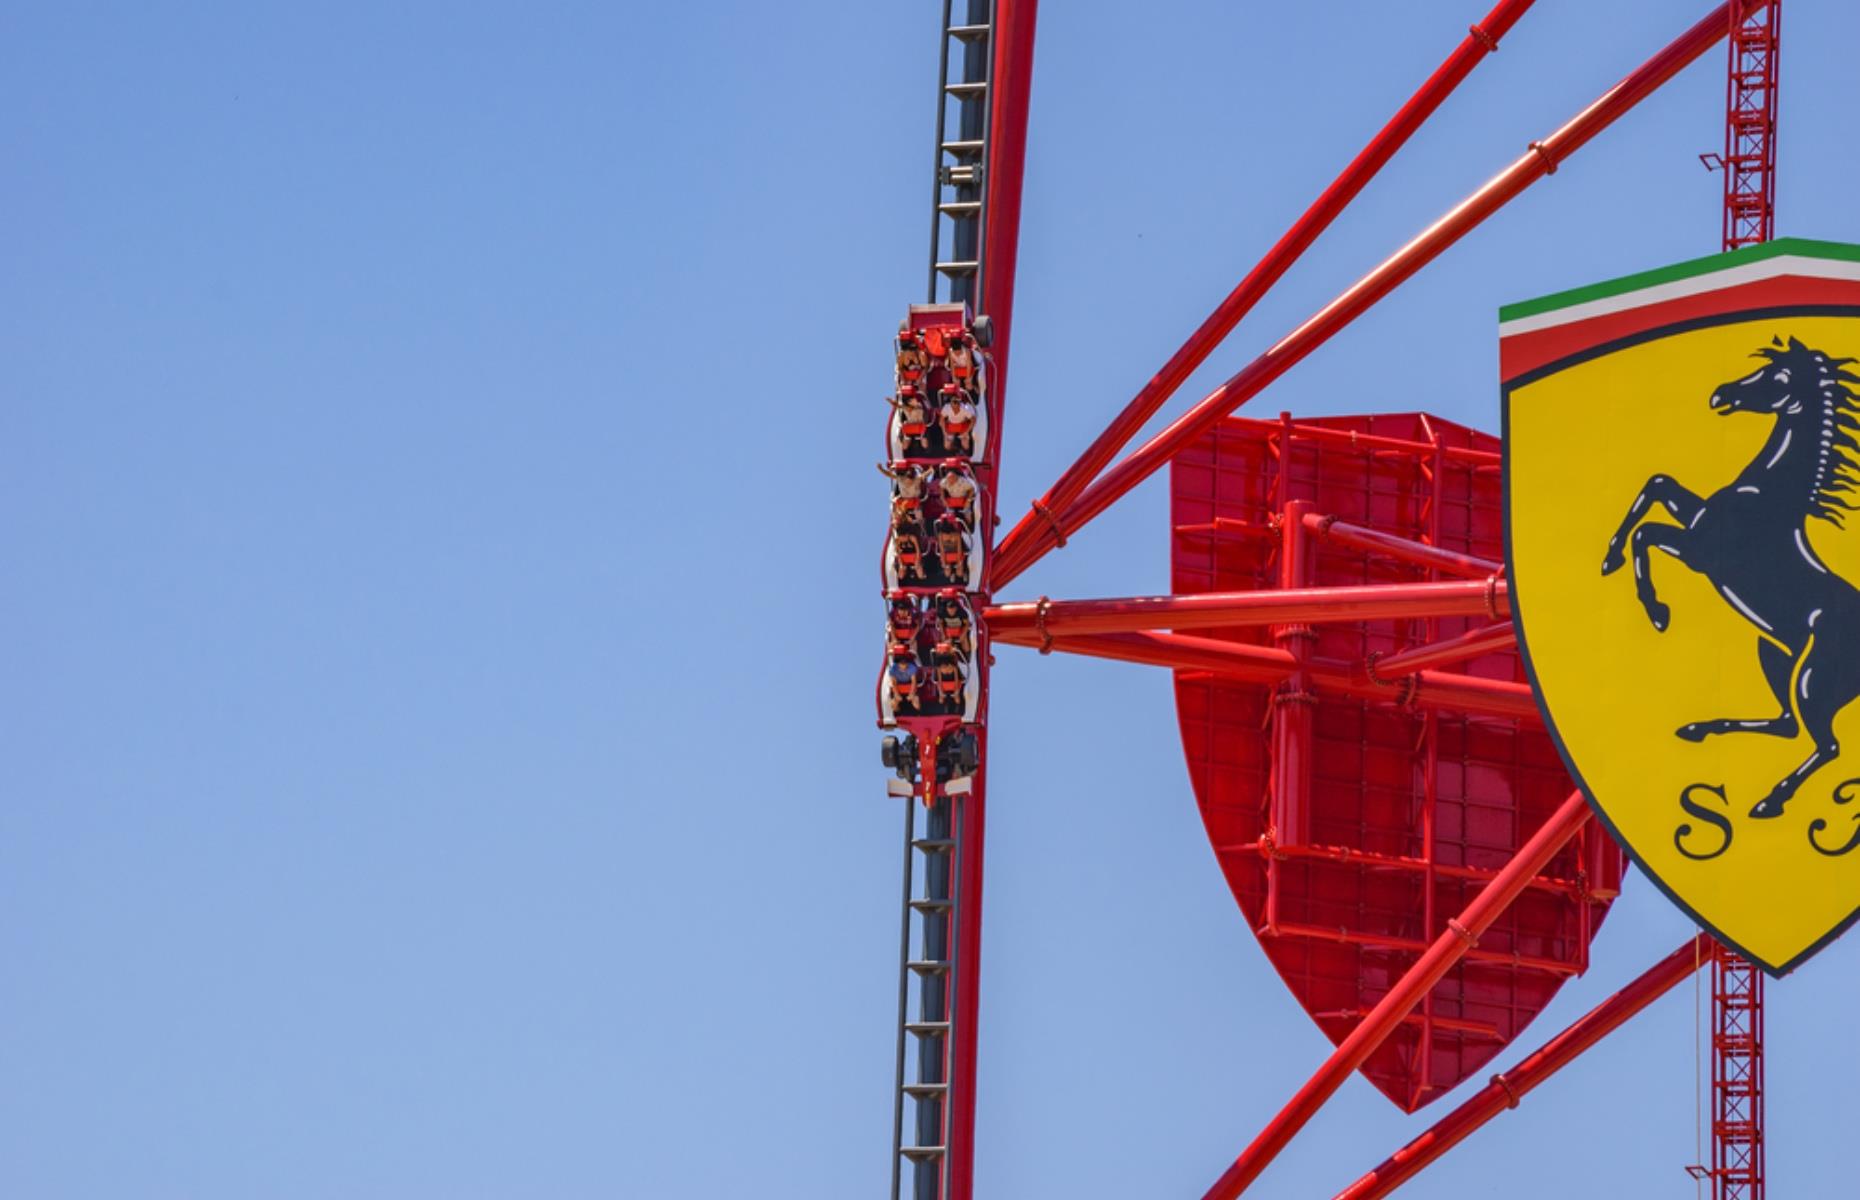 <p>For the fastest coaster in Europe, you need to head to Ferrari Land in Spain. Red Force, which opened in 2017, peaks at a blistering 111.9 miles per hour. It is also Europe’s highest roller coaster at 367 feet.</p>  <p>Like a Formula One car, it accelerates off the grid in just five seconds and catapults you straight into the sky and back down again. Definitely not for the faint-hearted but a must for F1 fans.</p>